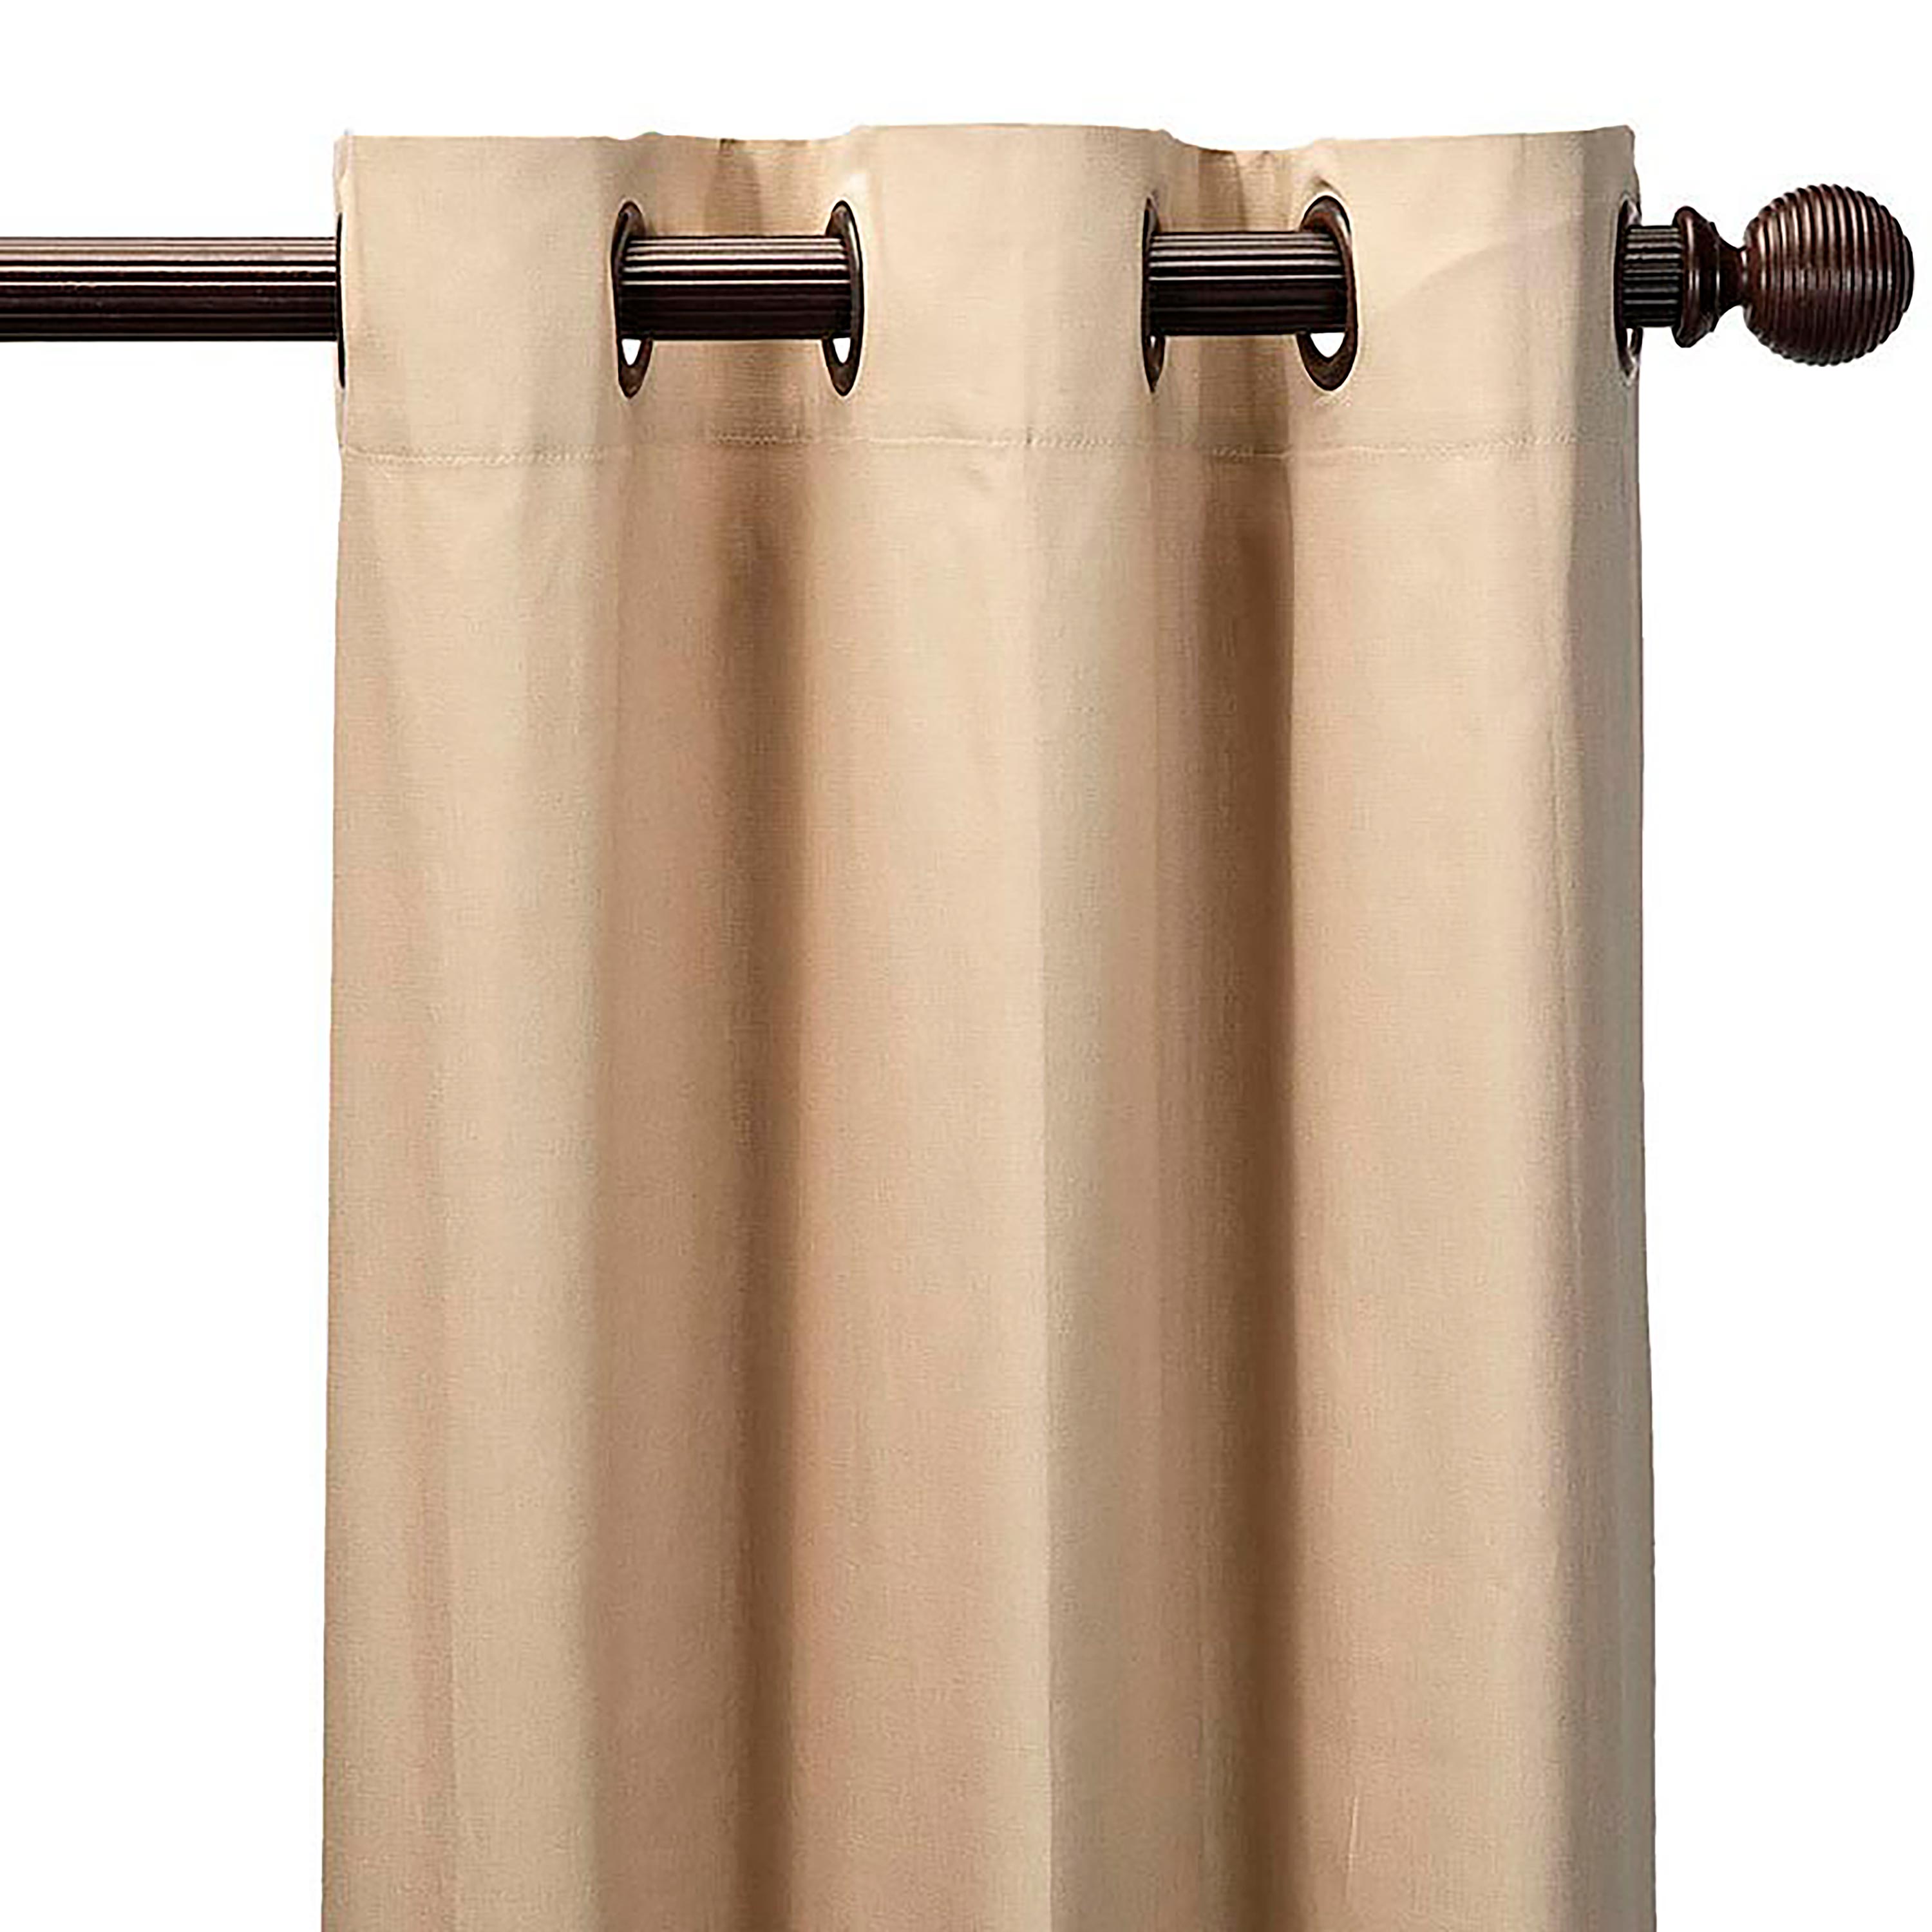 Image of 40"W x 15" L Thermalogic Insulated Grommet-Top Valance, in Khaki